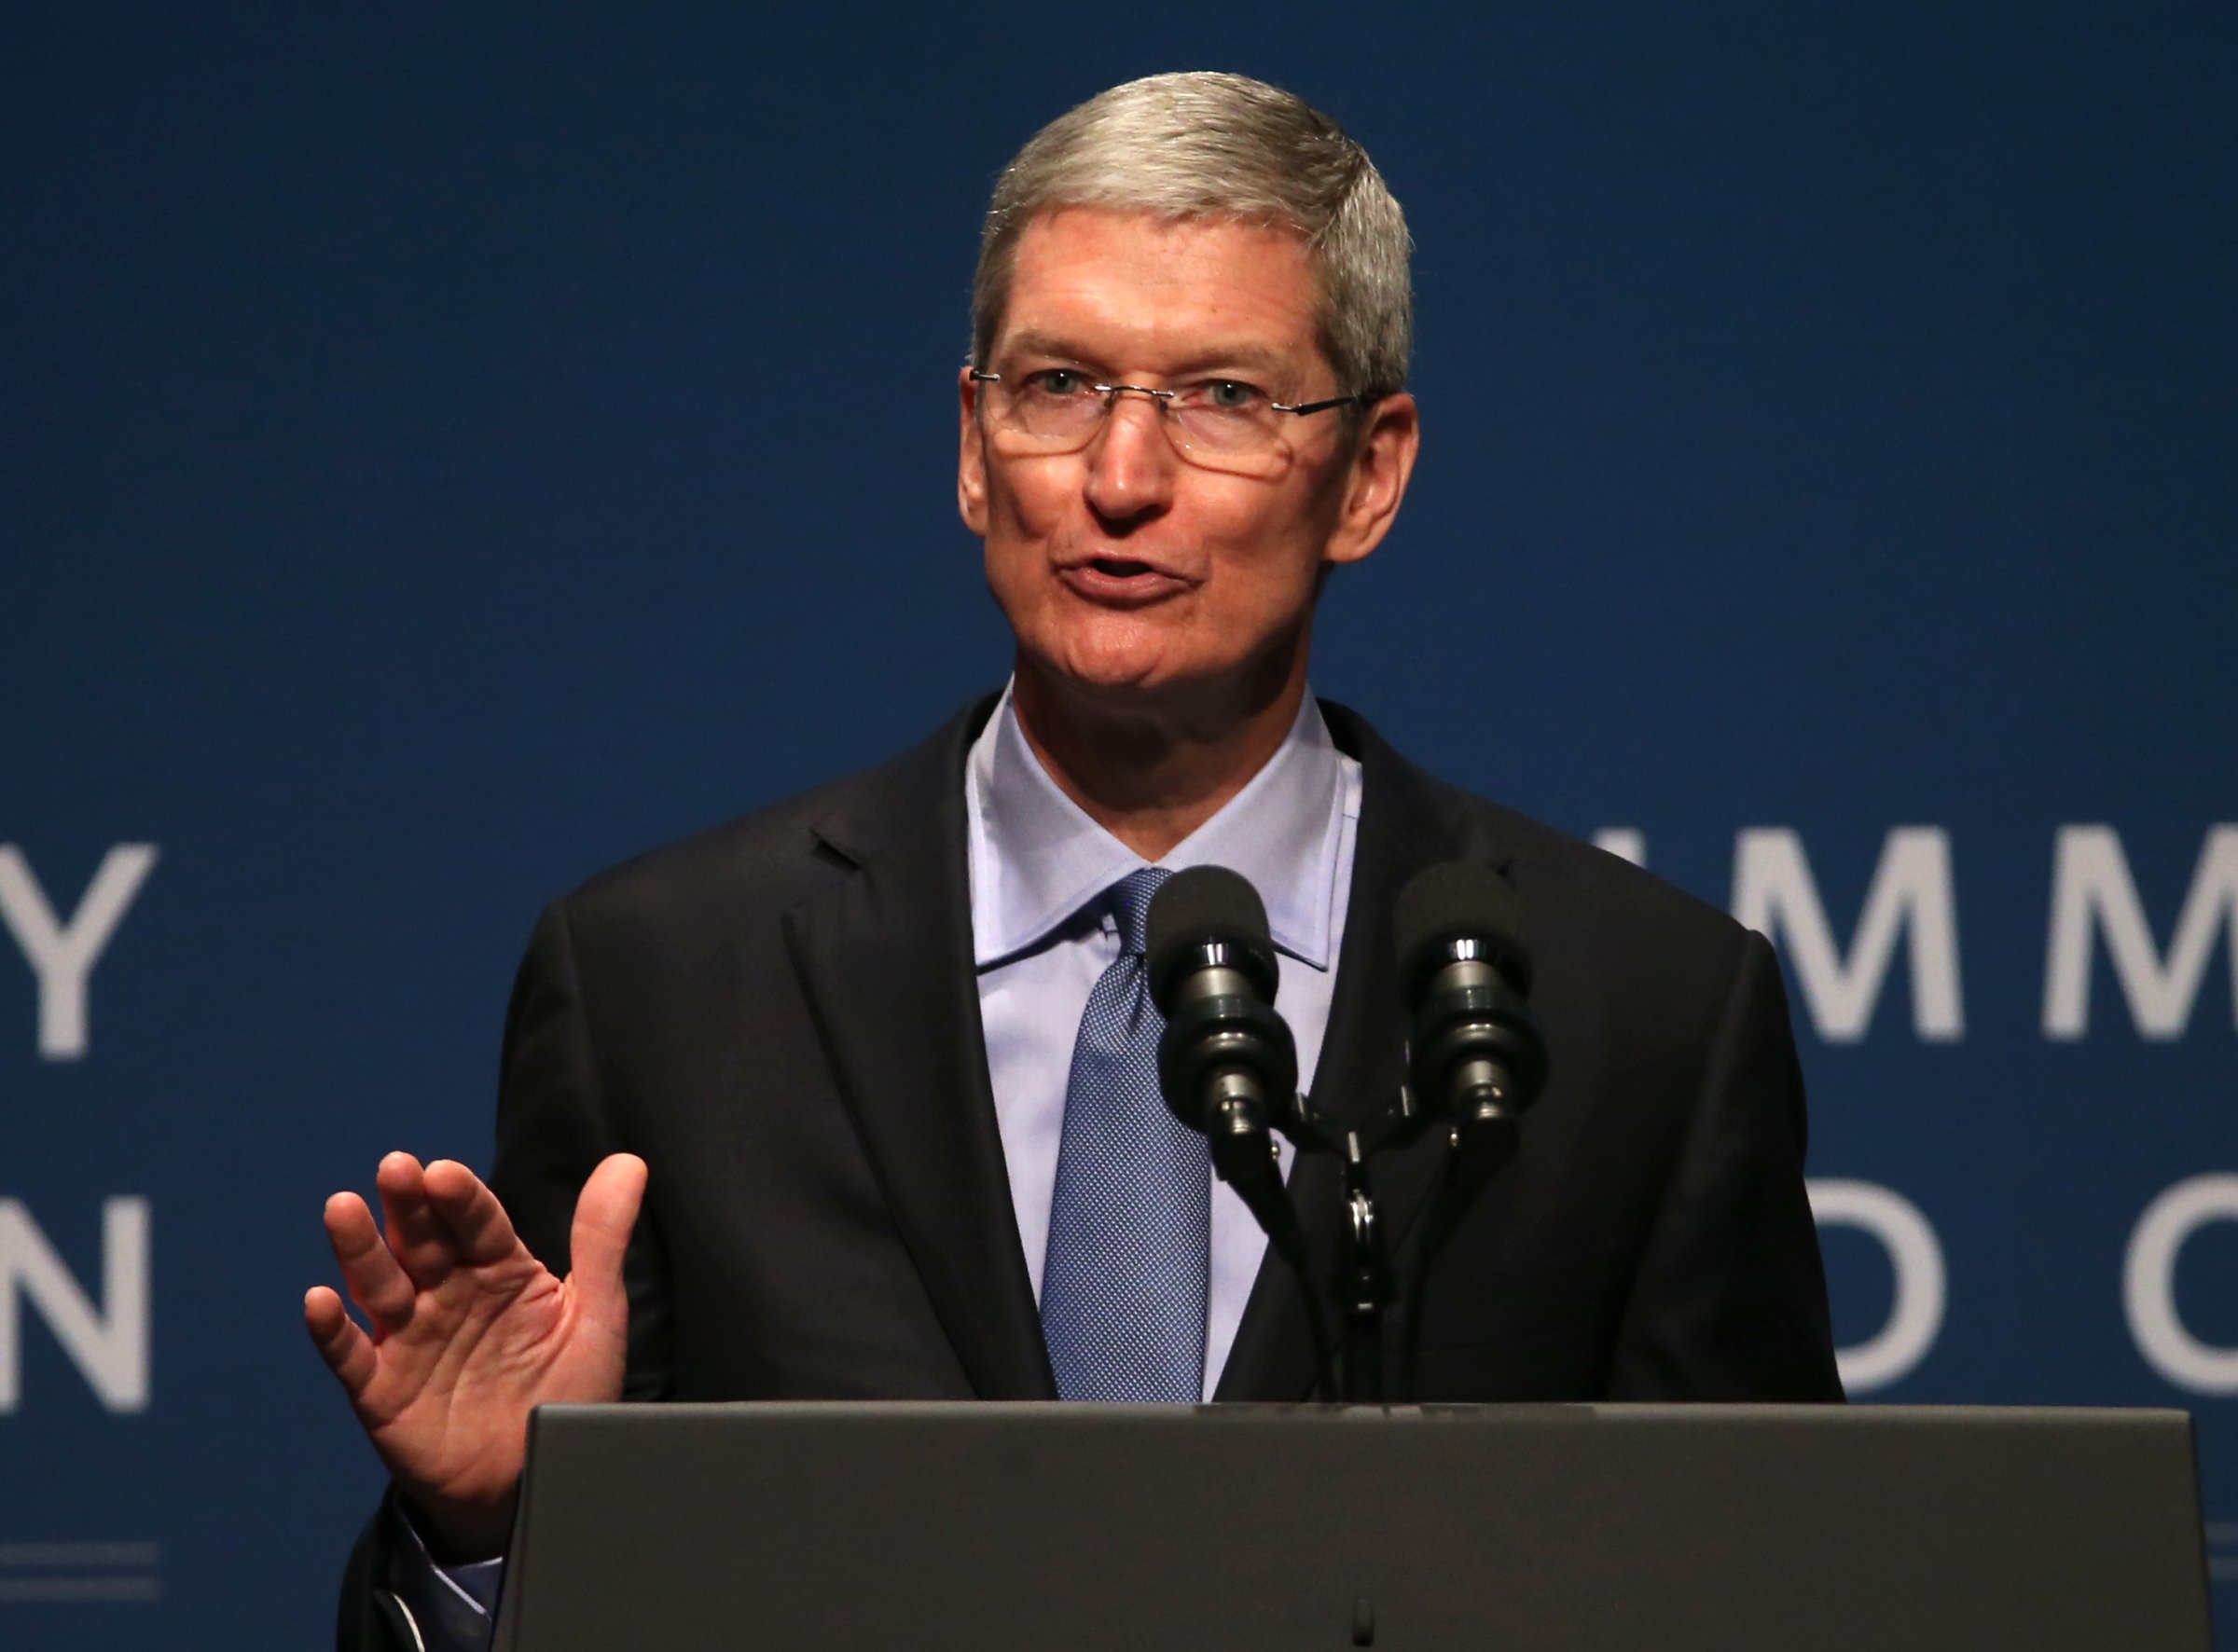 Apple CEO Tim Cook speaks during the White House Summit on Cybersecurity and Consumer Protection in Stanford, Calif. on Feb. 13, 2015.